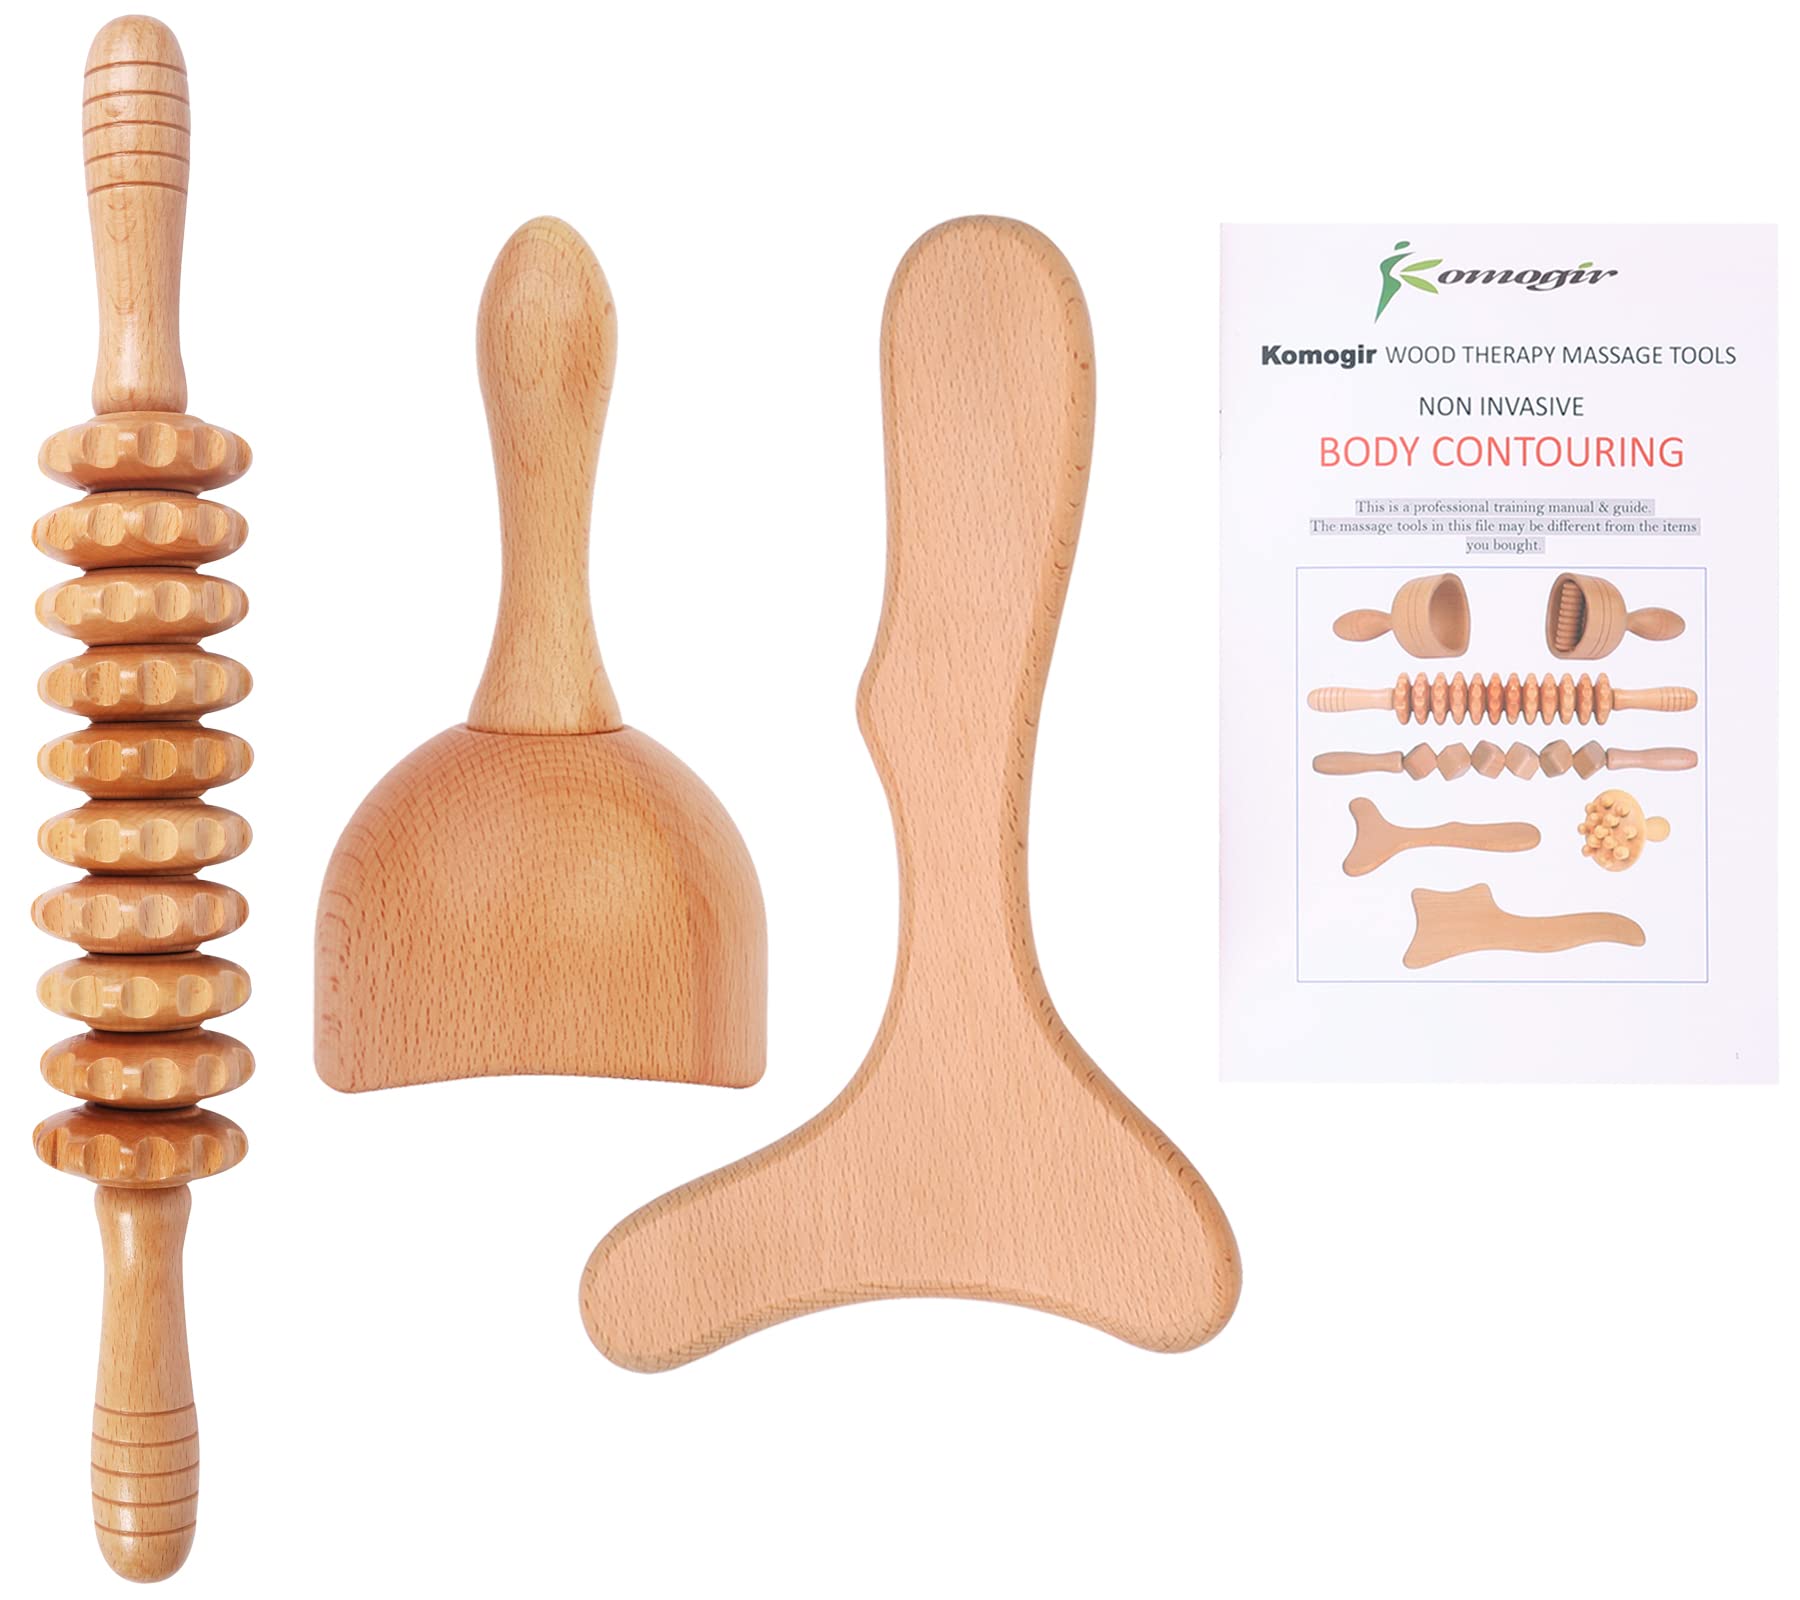 3 In 1 Wood Therapy Massage Tools Lymphatic Drainage Massager Wooden Massager Body Gua Sha Tools